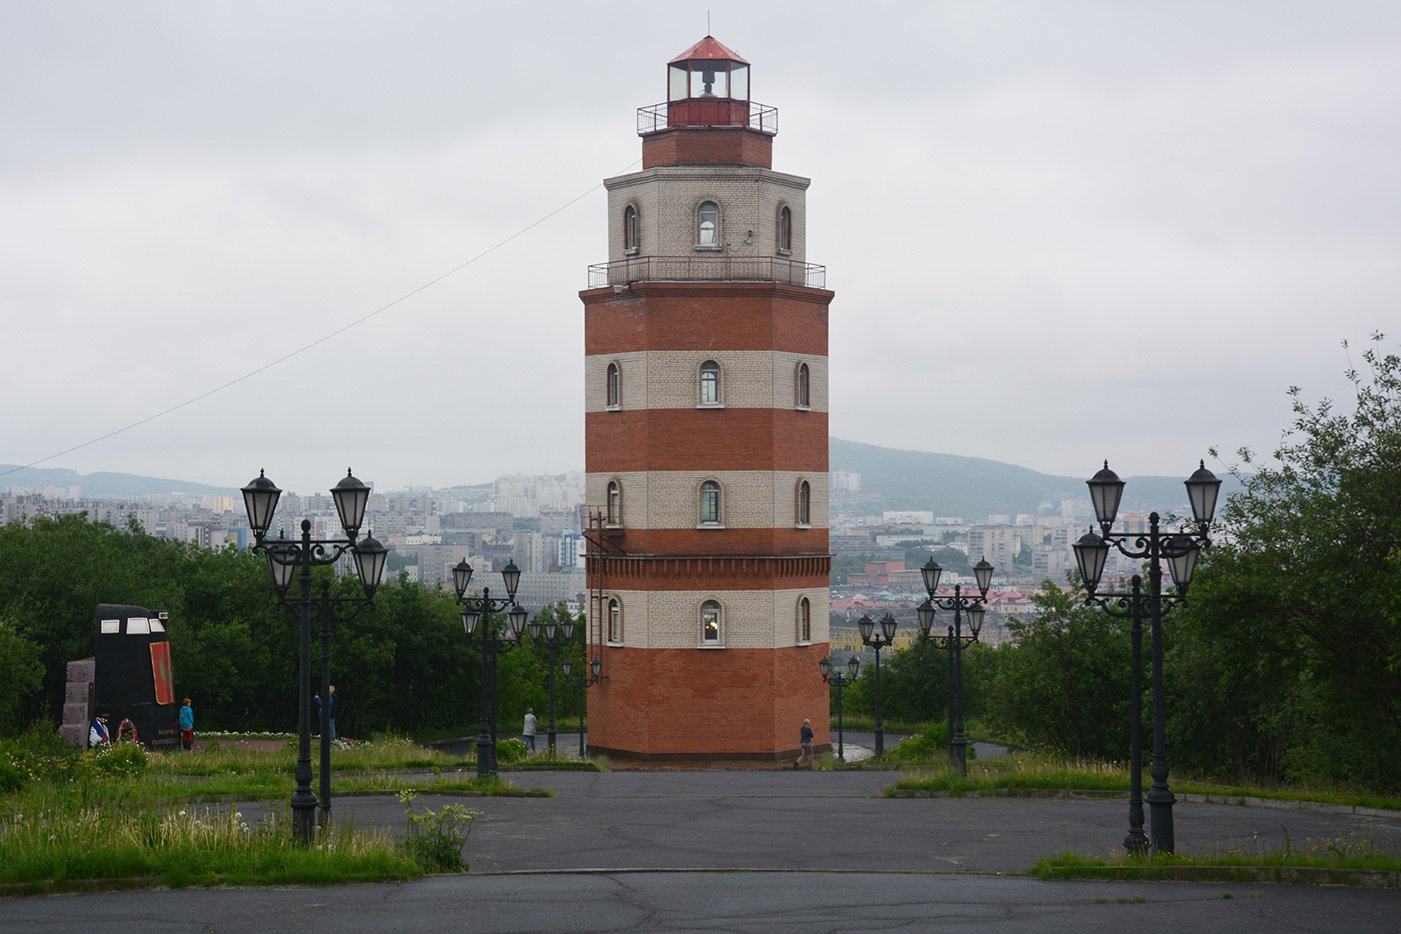 Murmansk, Russia, the largest city in the world north of the Arctic Circle, has a long naval history. 